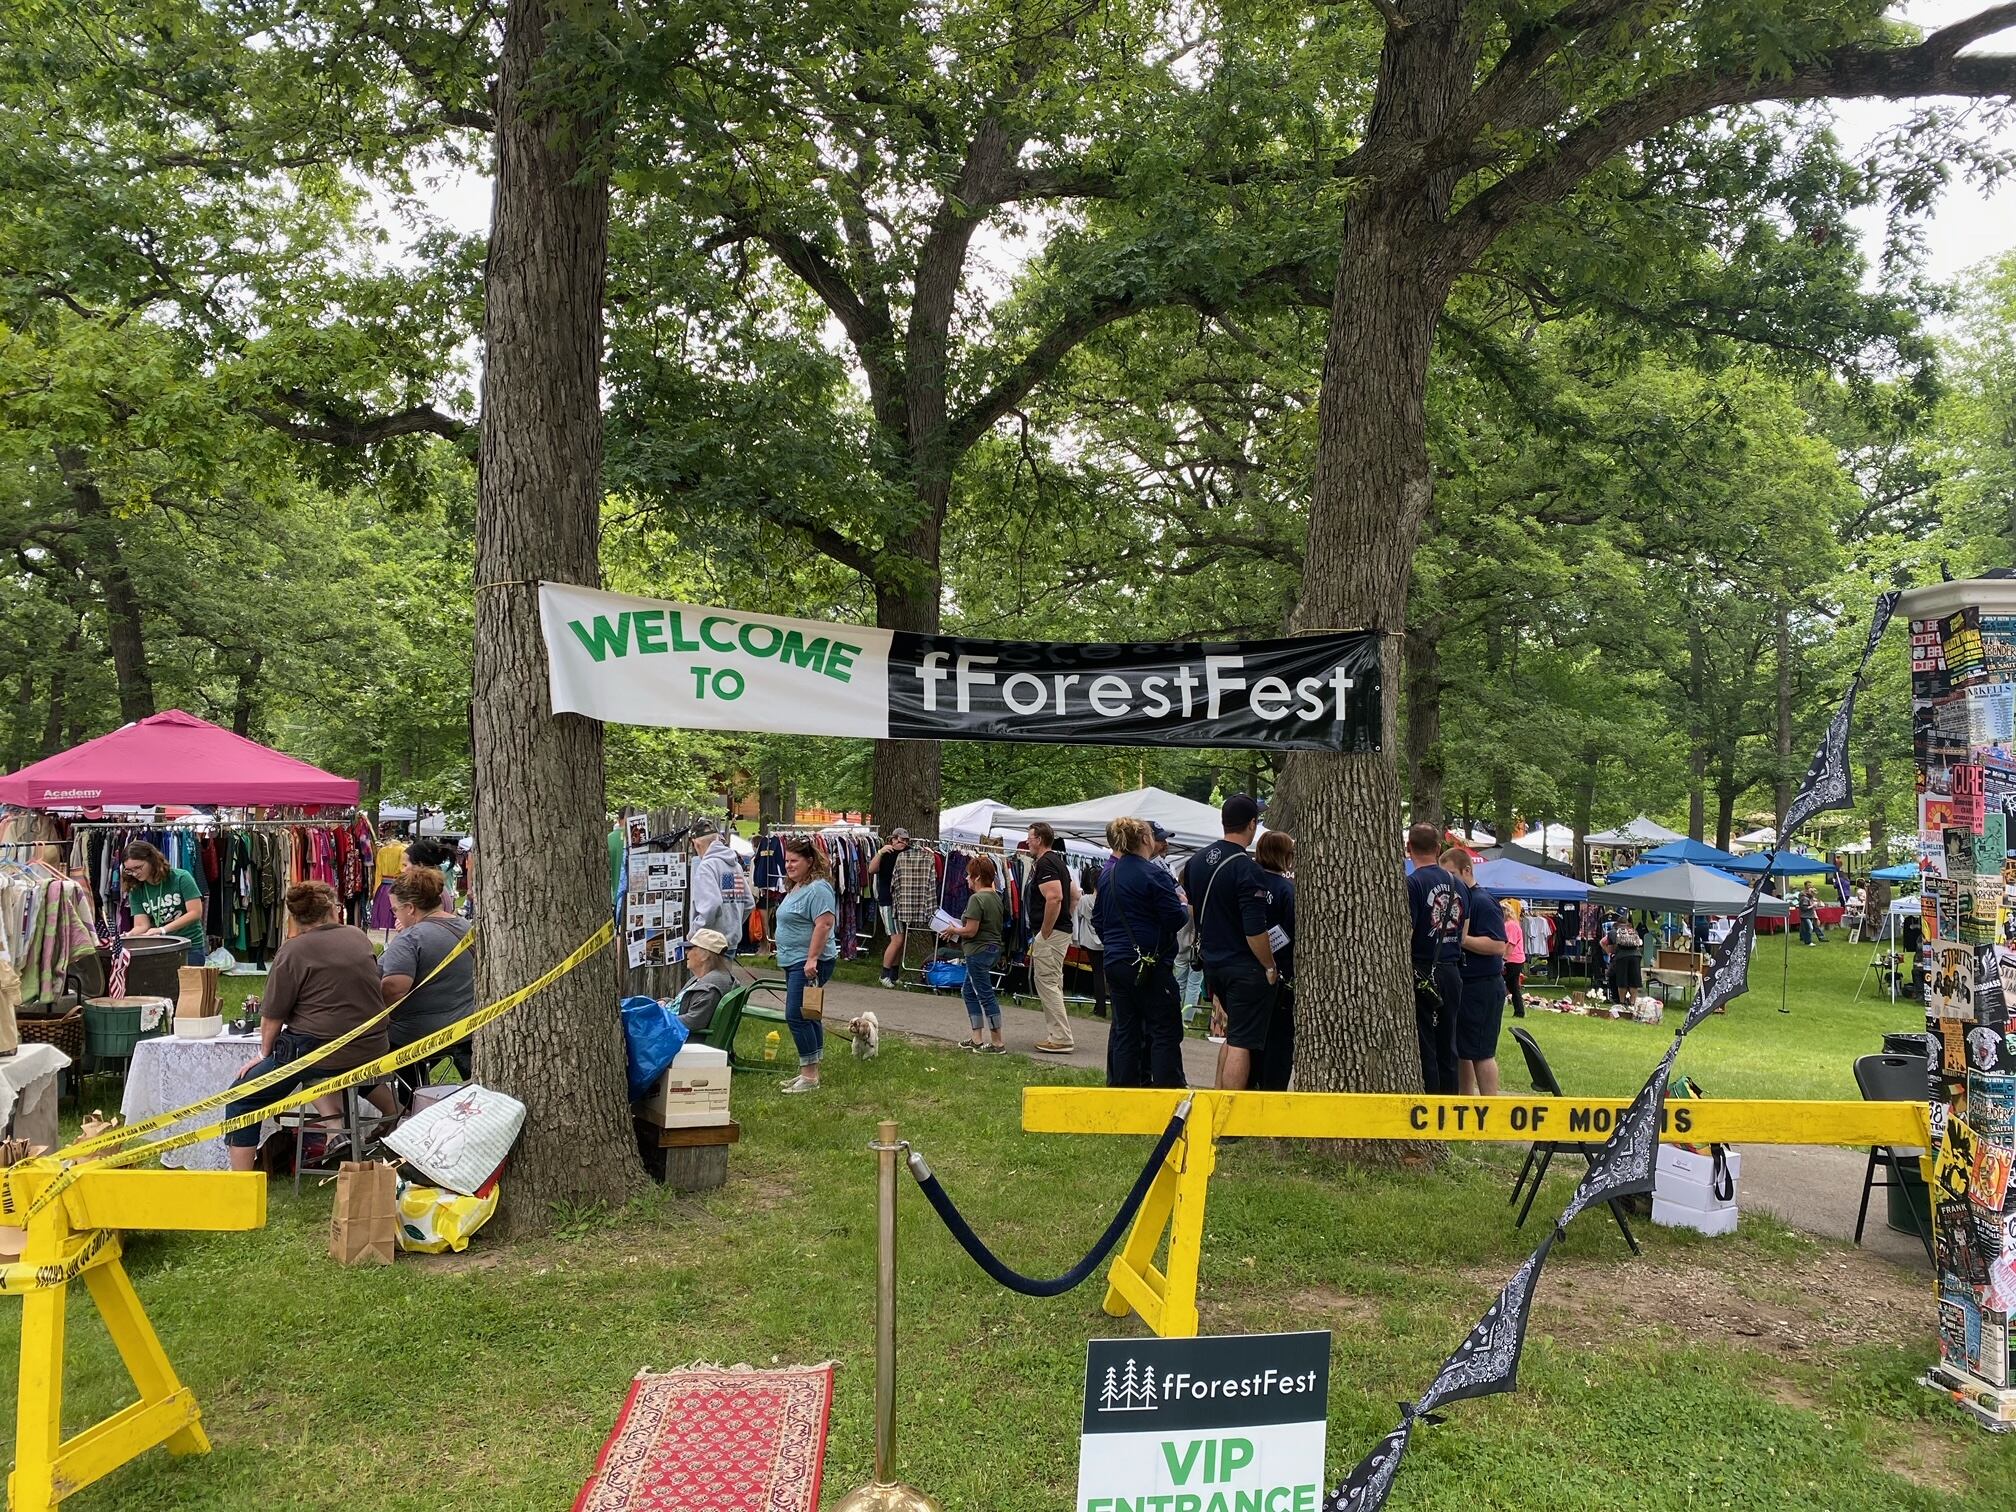 With summer in full swing, Morris celebrated Saturday with its first-ever fForest Fest featuring live entertainment, food trucks, yoga under the trees, and kids activities.